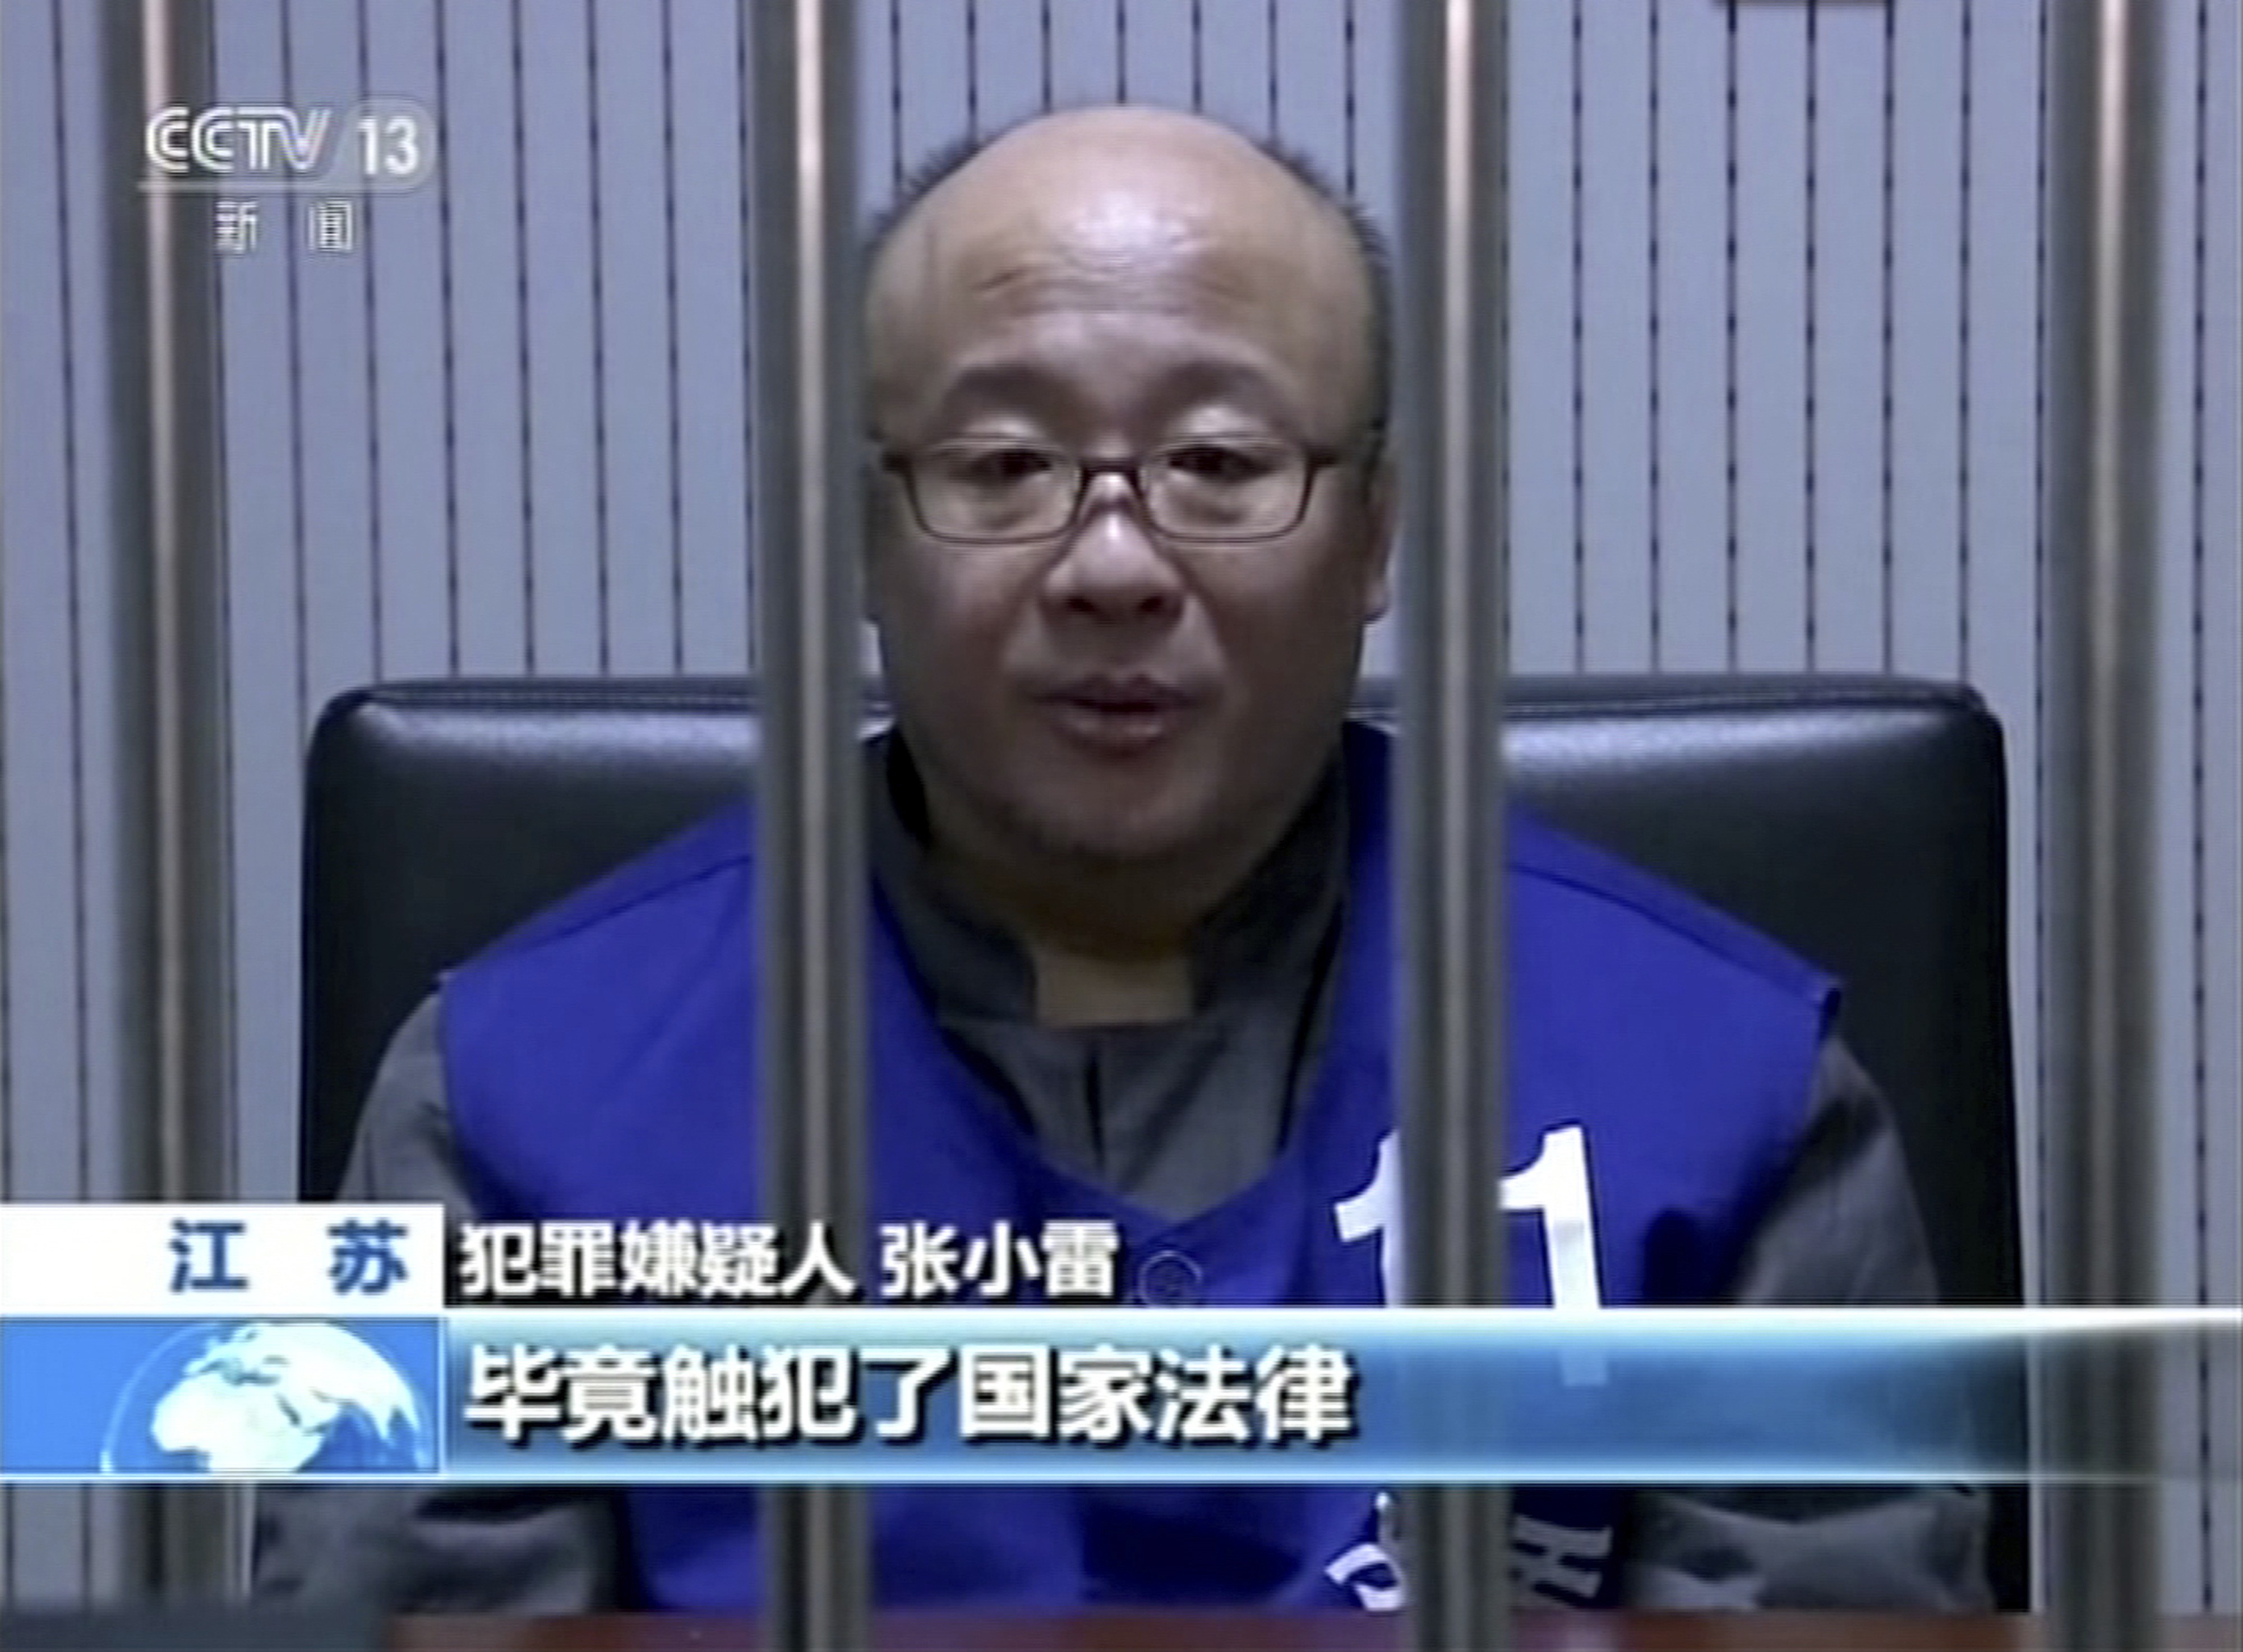 A still from state television shows the founder of the Ponzi scheme, Zhang Xiaolei, behind bars. Photo: Associated Press